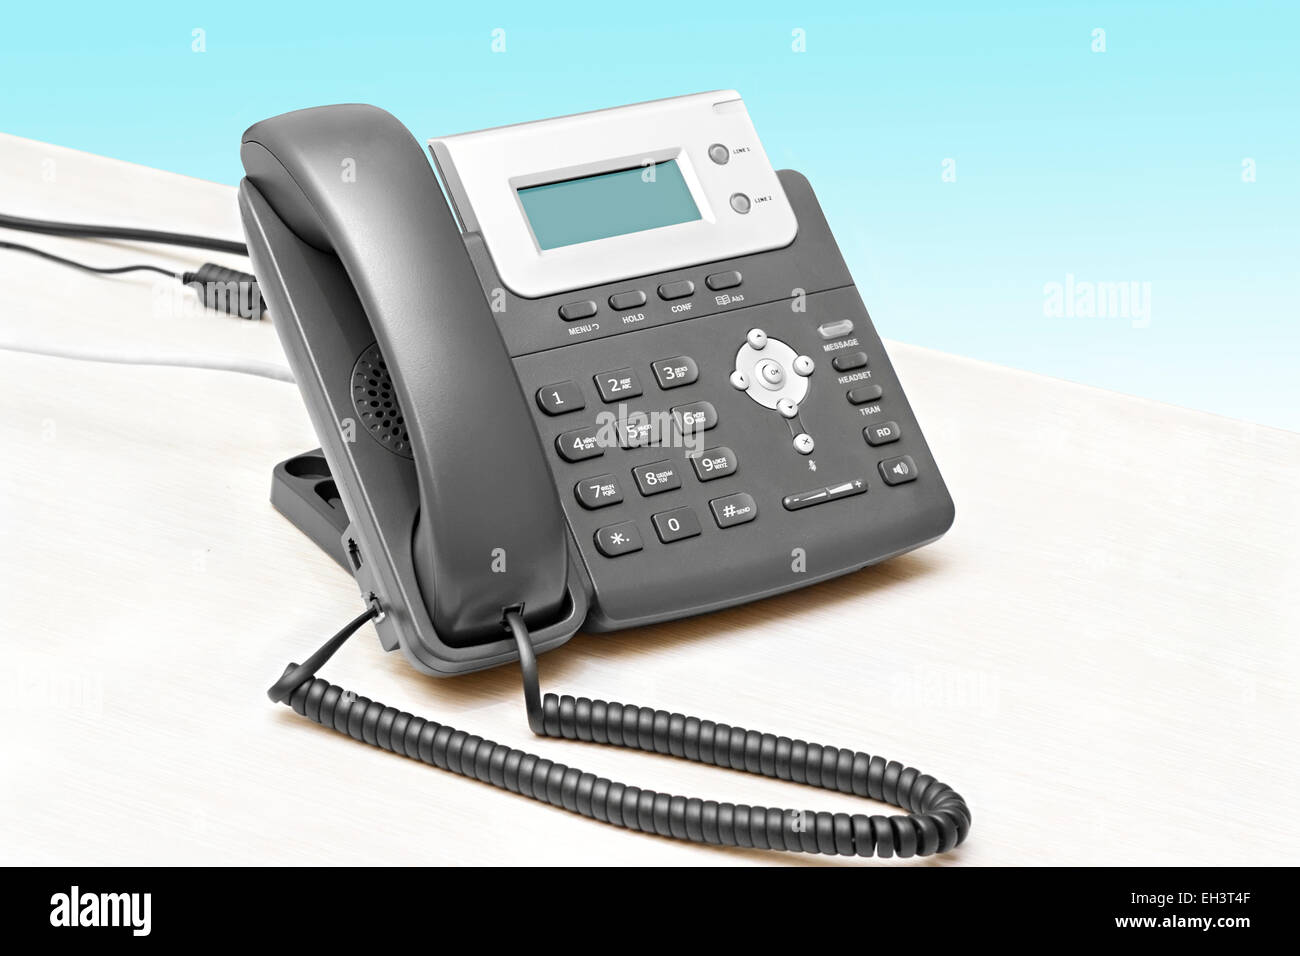 IP phone with a display table at the isolated Stock Photo